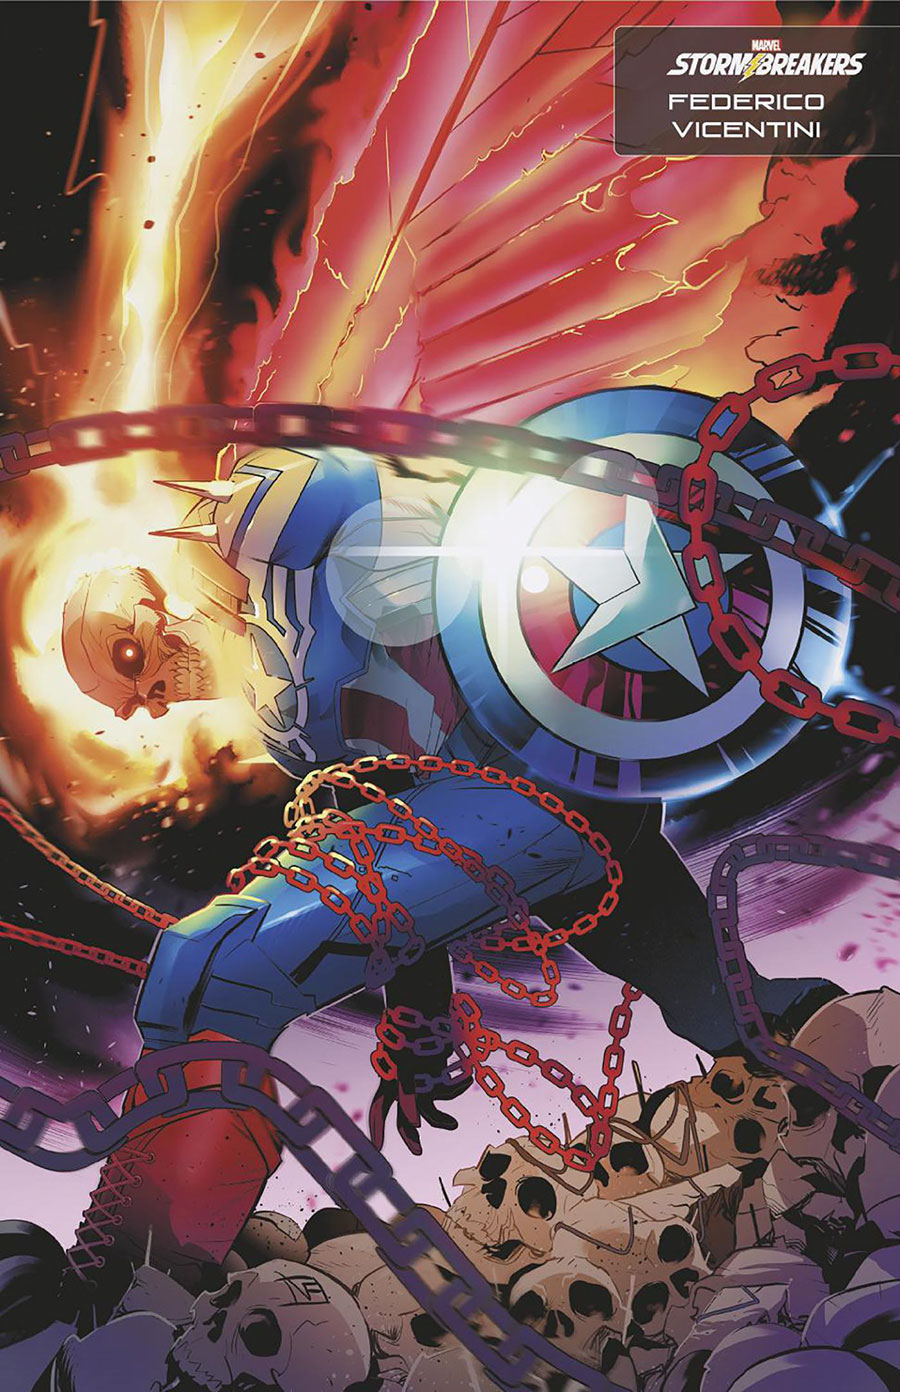 Avengers Vol 8 #14 Cover C Variant Federico Vicentini Stormbreakers Cover (Blood Hunt Tie-In)